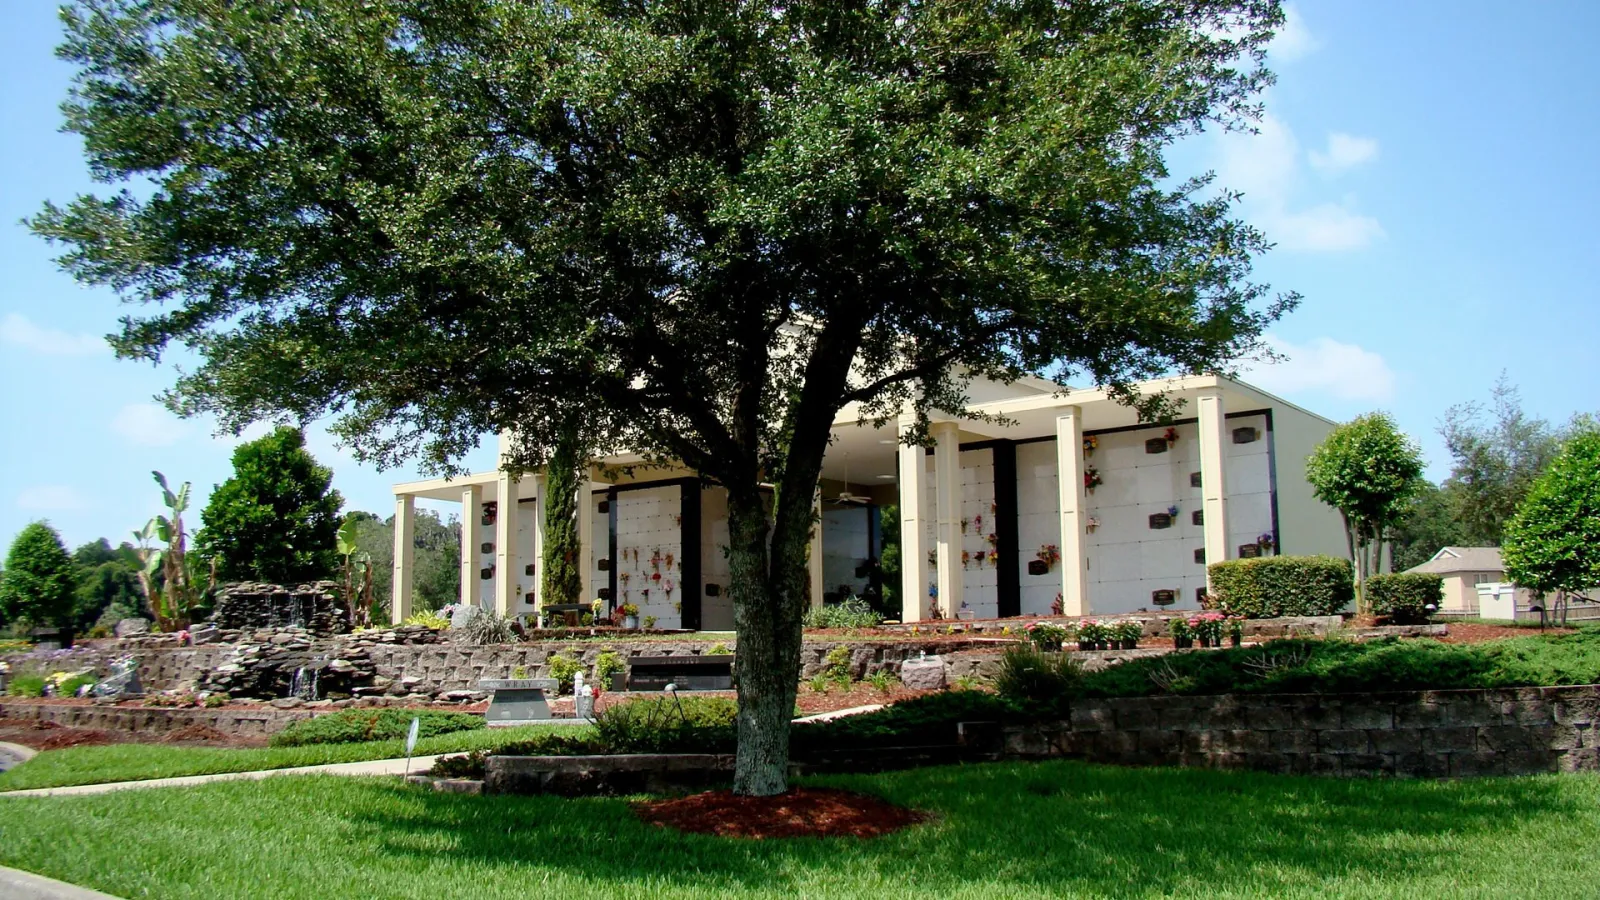 Serenity Meadhows Memorial Park Funeral Home Building in Riverview, Florida